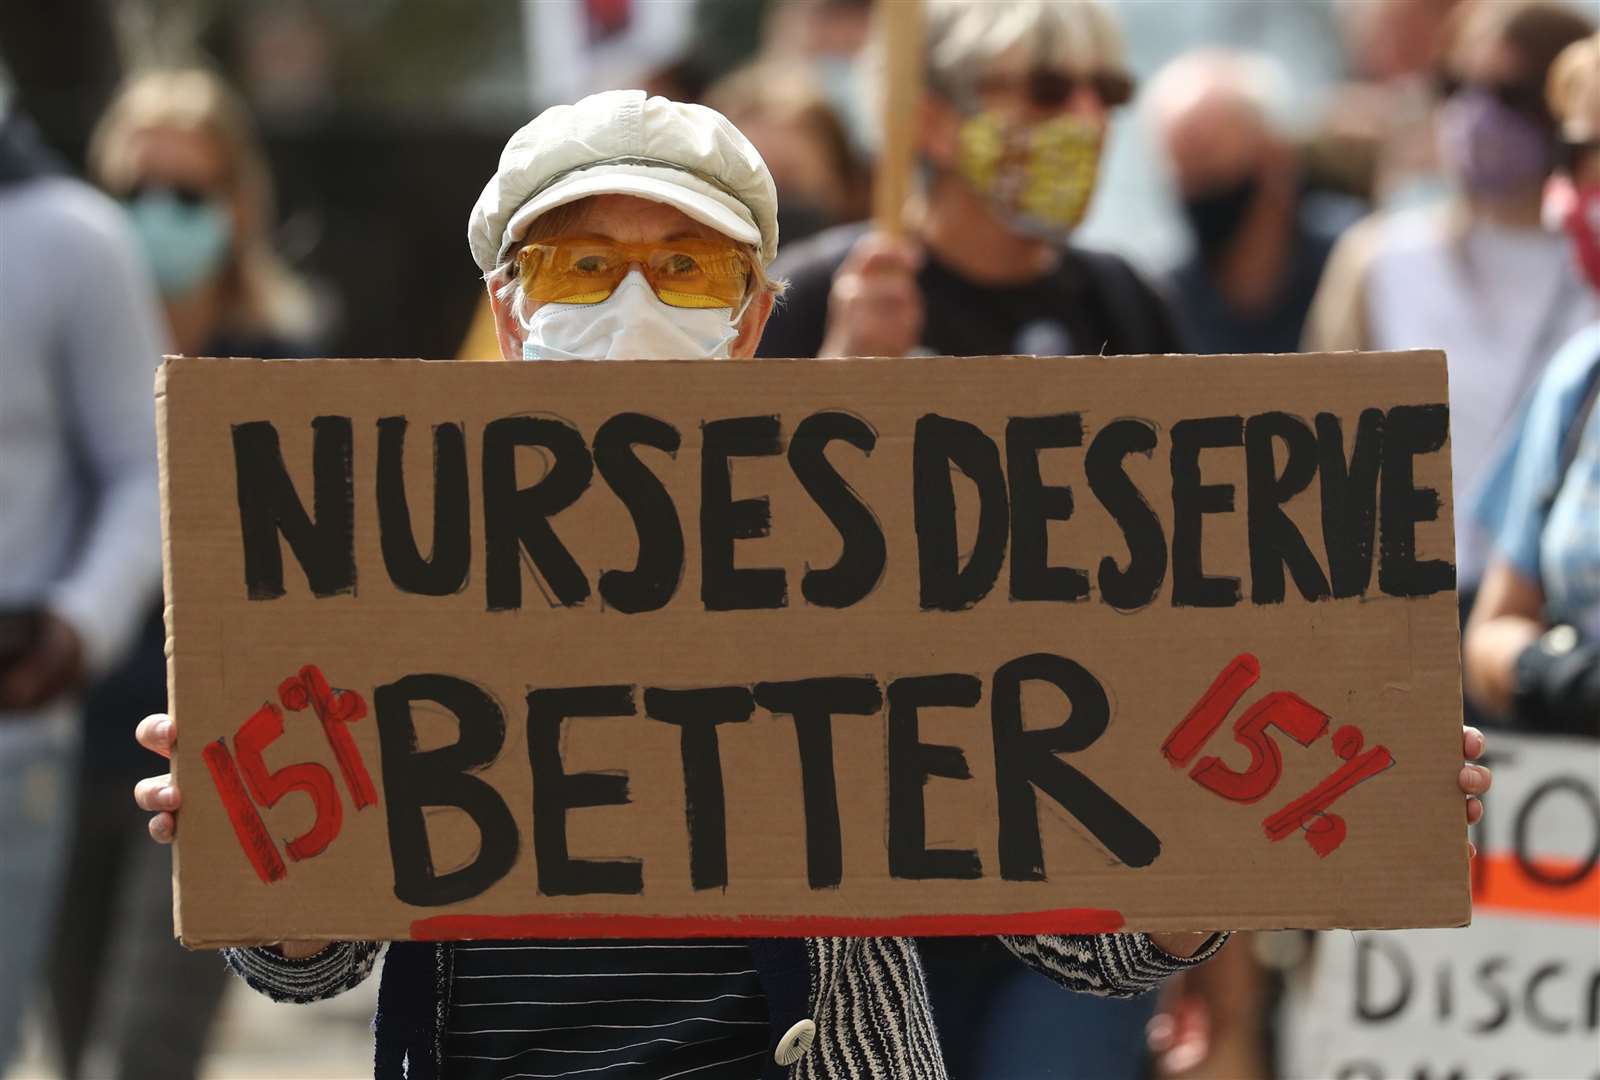 Campaigners are seeking a 15% pay rise for NHS workers and an increase in NHS funding (Gareth Fuller/PA)